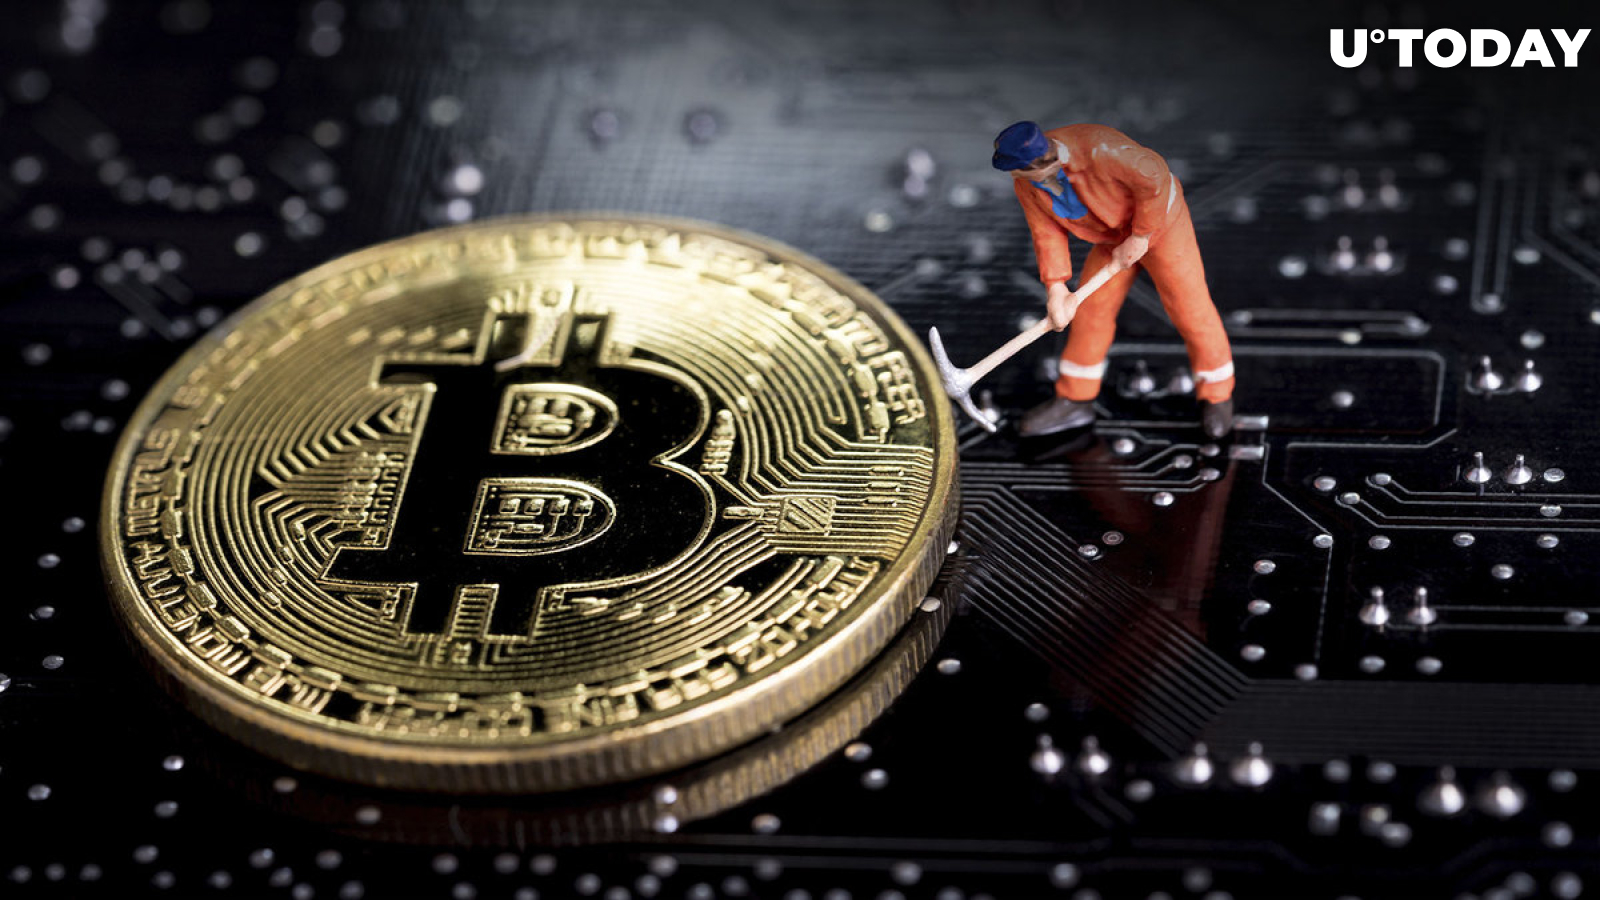 Bitcoin (BTC) Miners Started 'Most Aggressive Selling' in Seven Years: Analyst